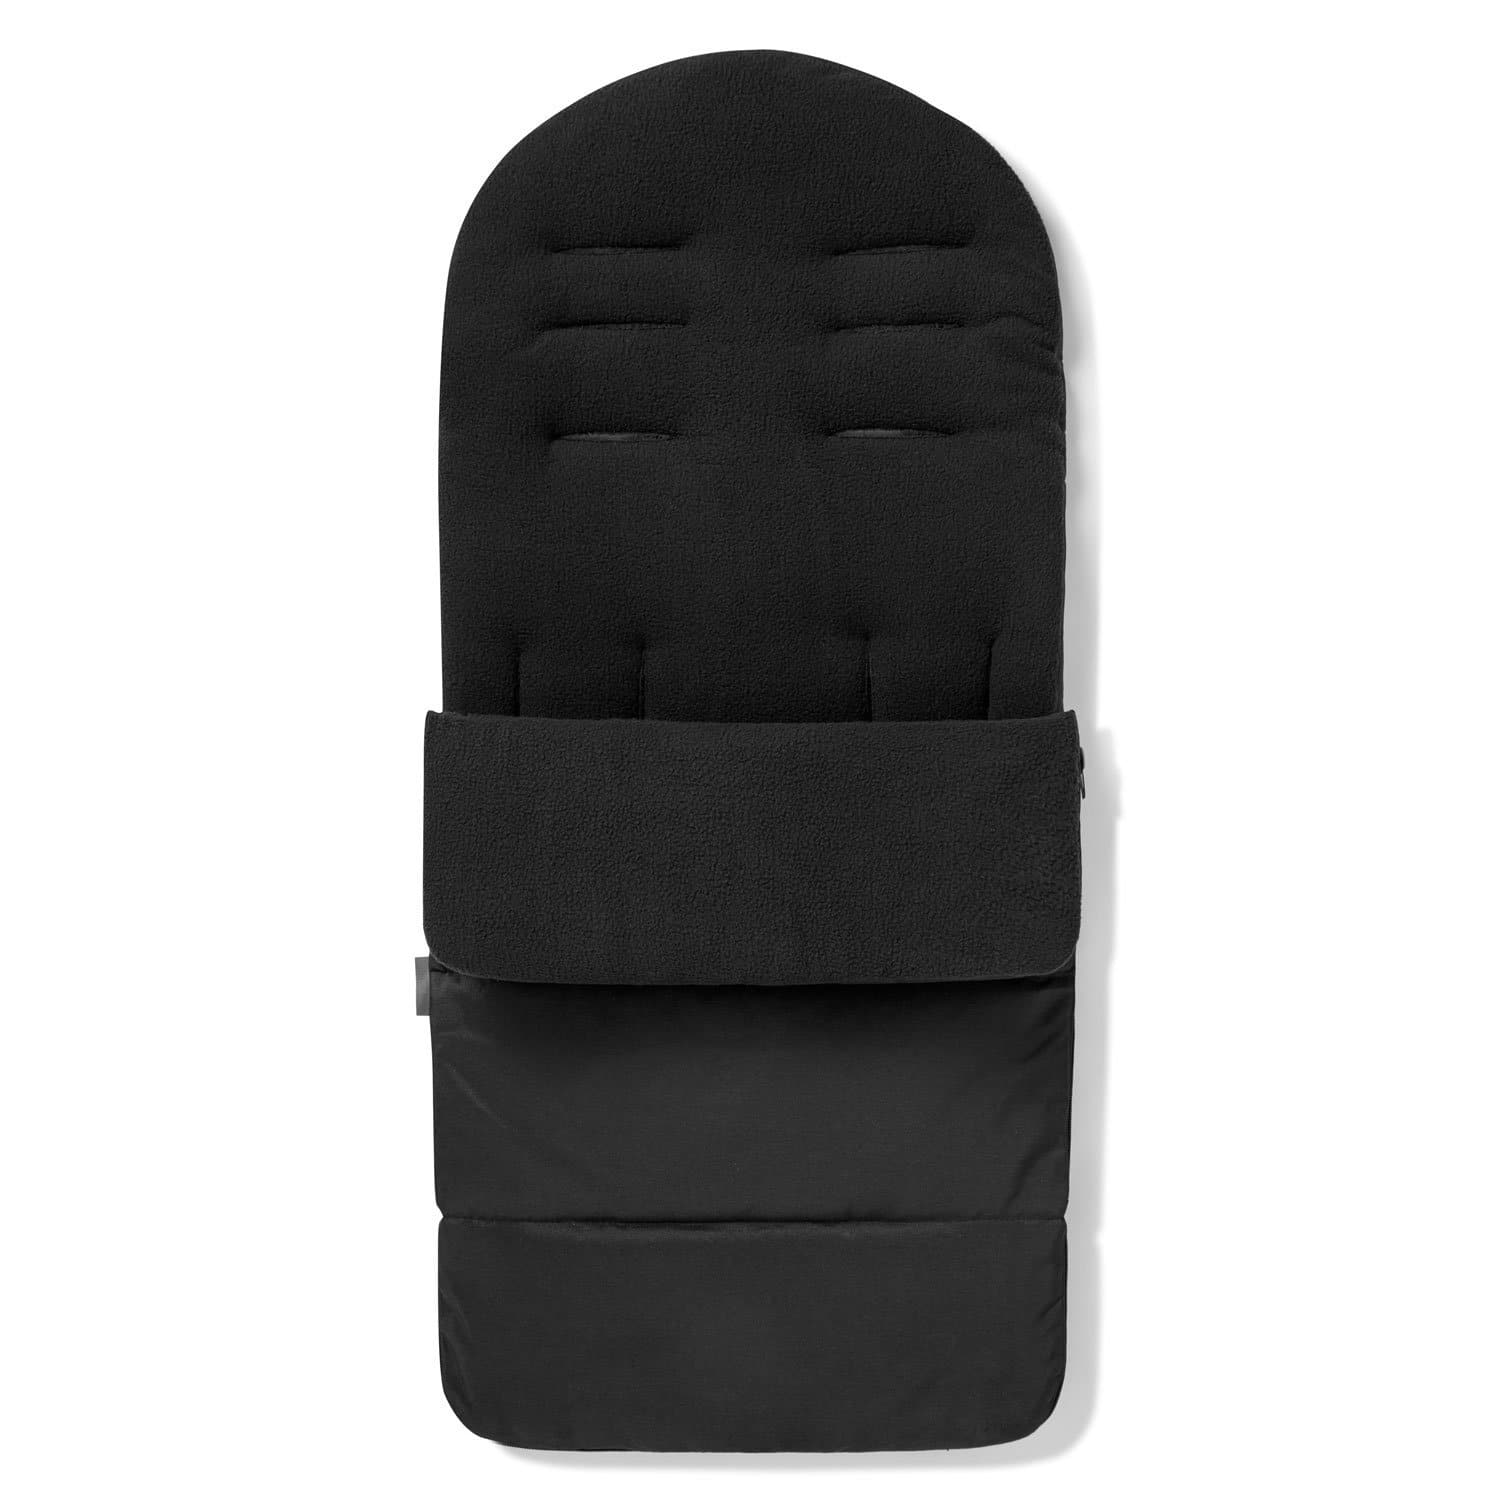 Premium Footmuff / Cosy Toes Compatible with ABC Design - Black Jack / Fits All Models | For Your Little One